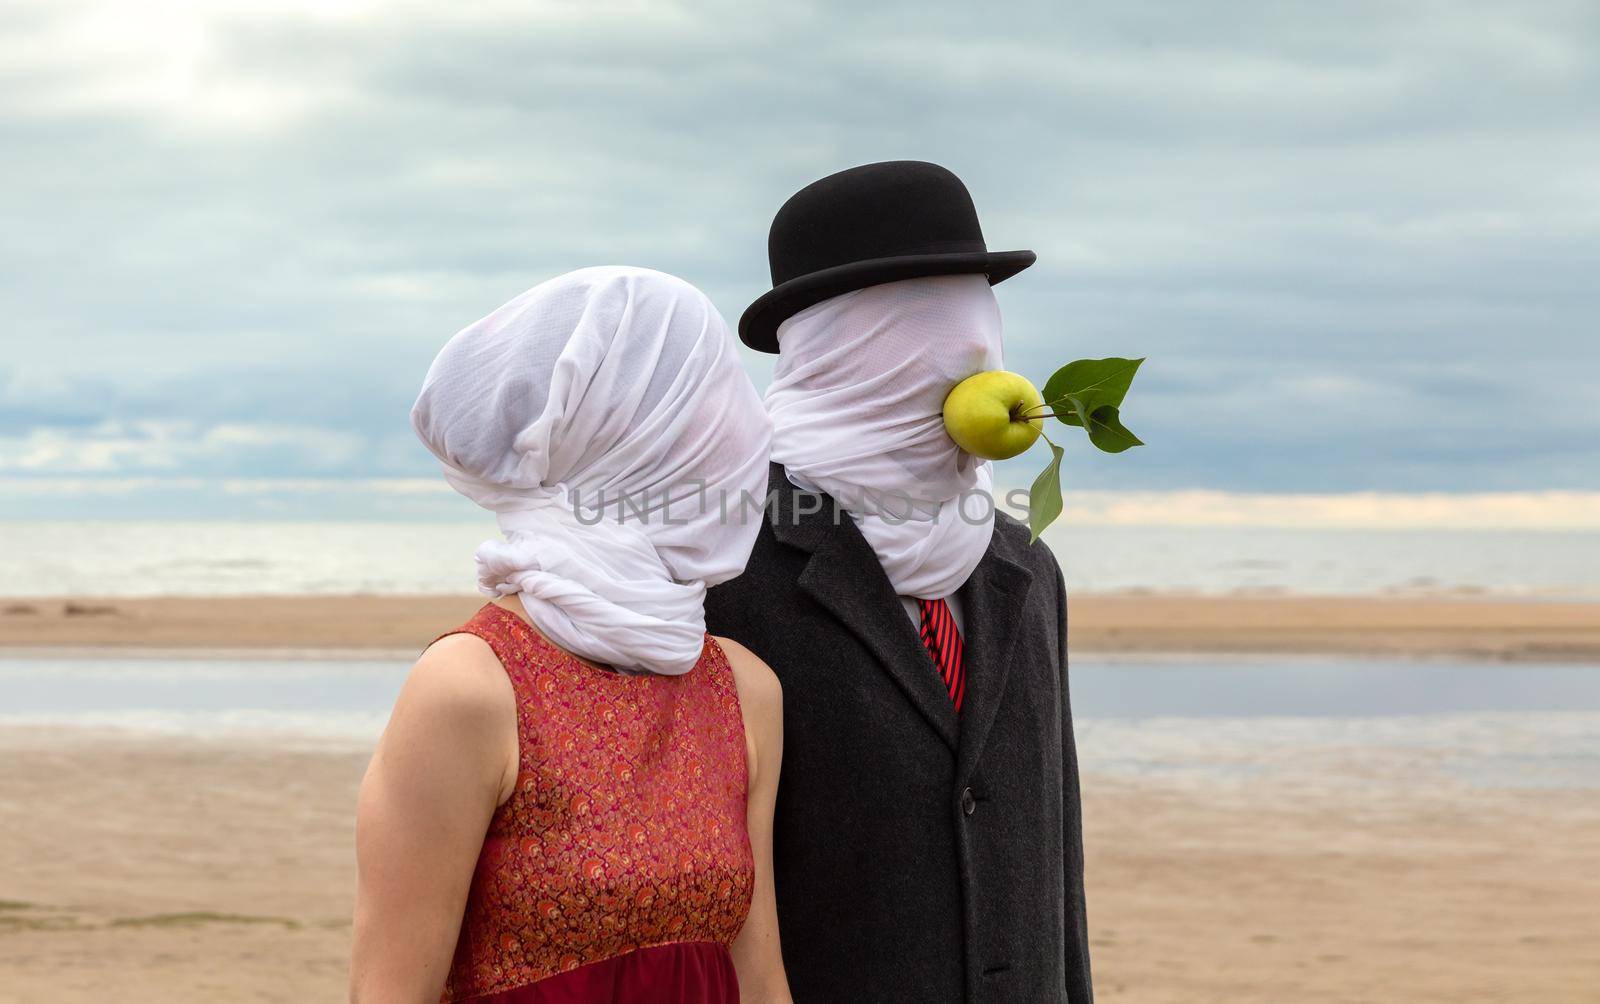 Man and woman with white fabrics on their heads by palinchak